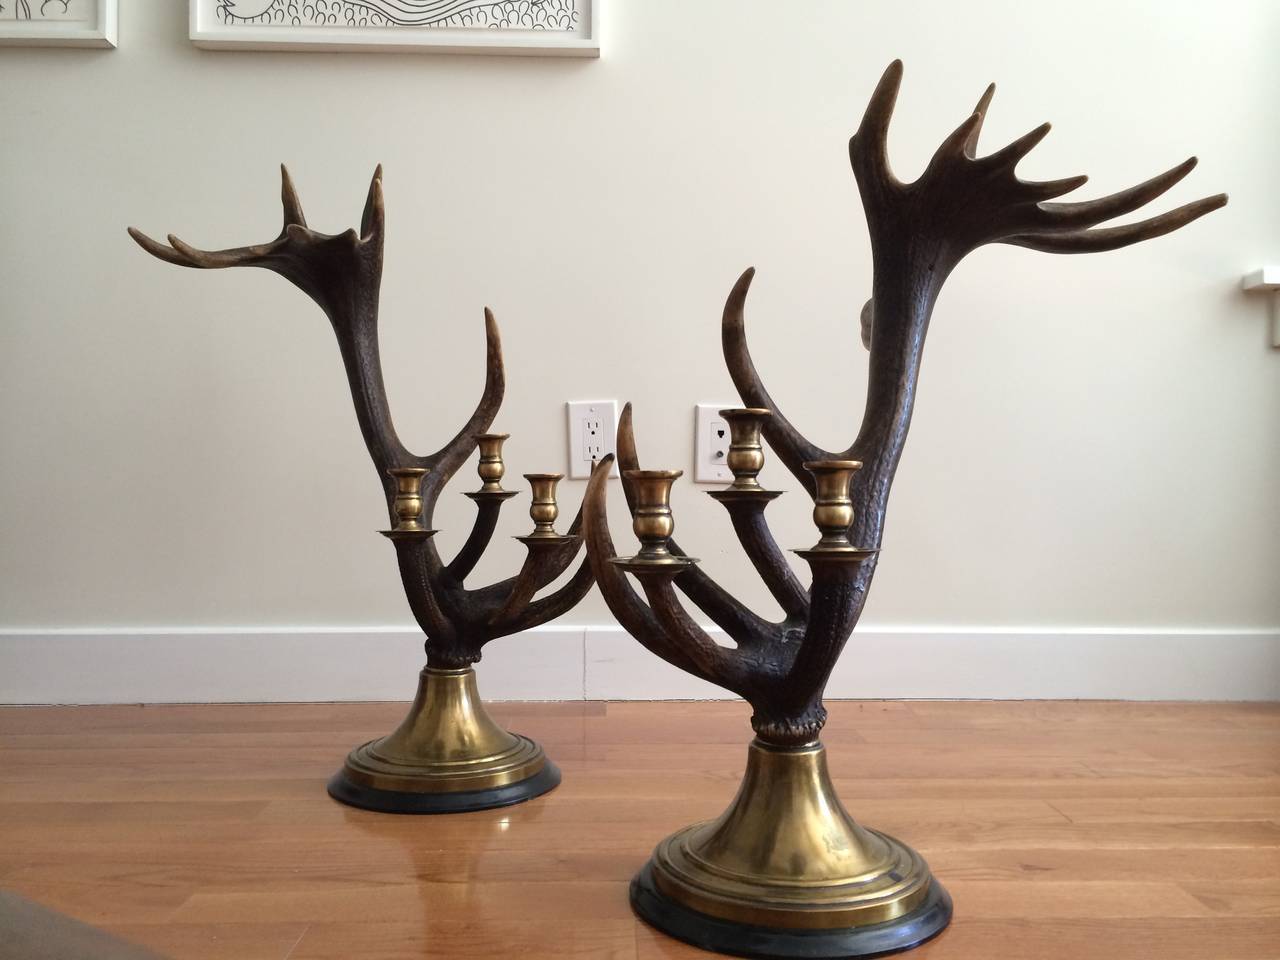 Three-light Scottish red deer antler candlesticks (In the Balmoral style) designed and manufactured by Anthony Redmile, London, circa 1980. 

Brass with ebonized base.